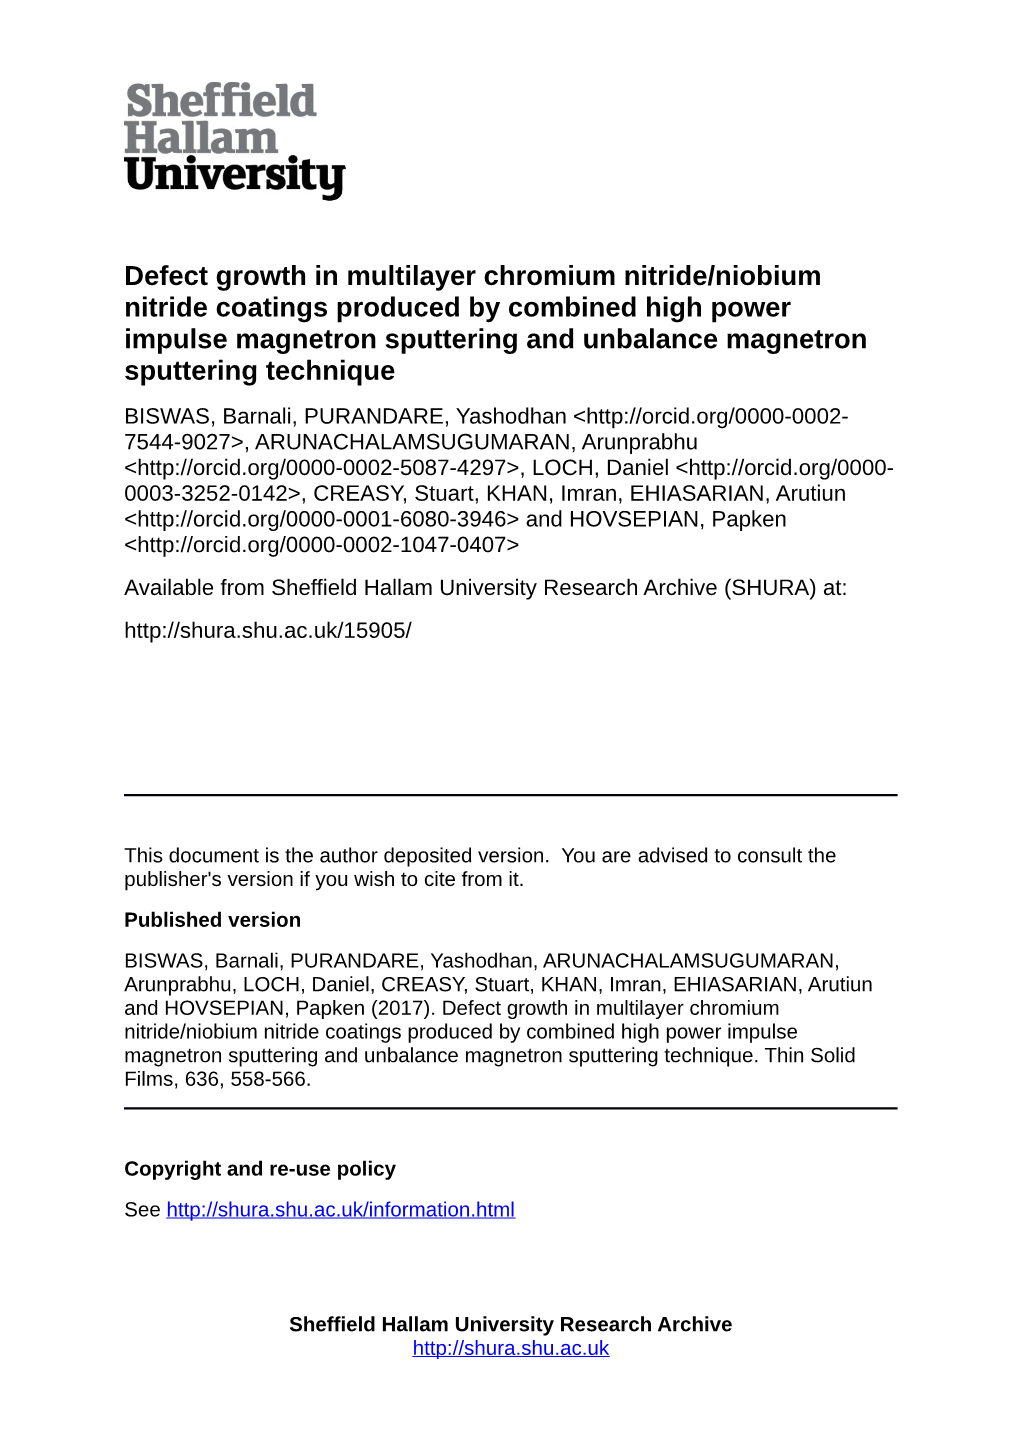 Defect Growth in Multilayer Chromium Nitride/Niobium Nitride Coatings Produced by Combined High Power Impulse Magnetron Sputteri